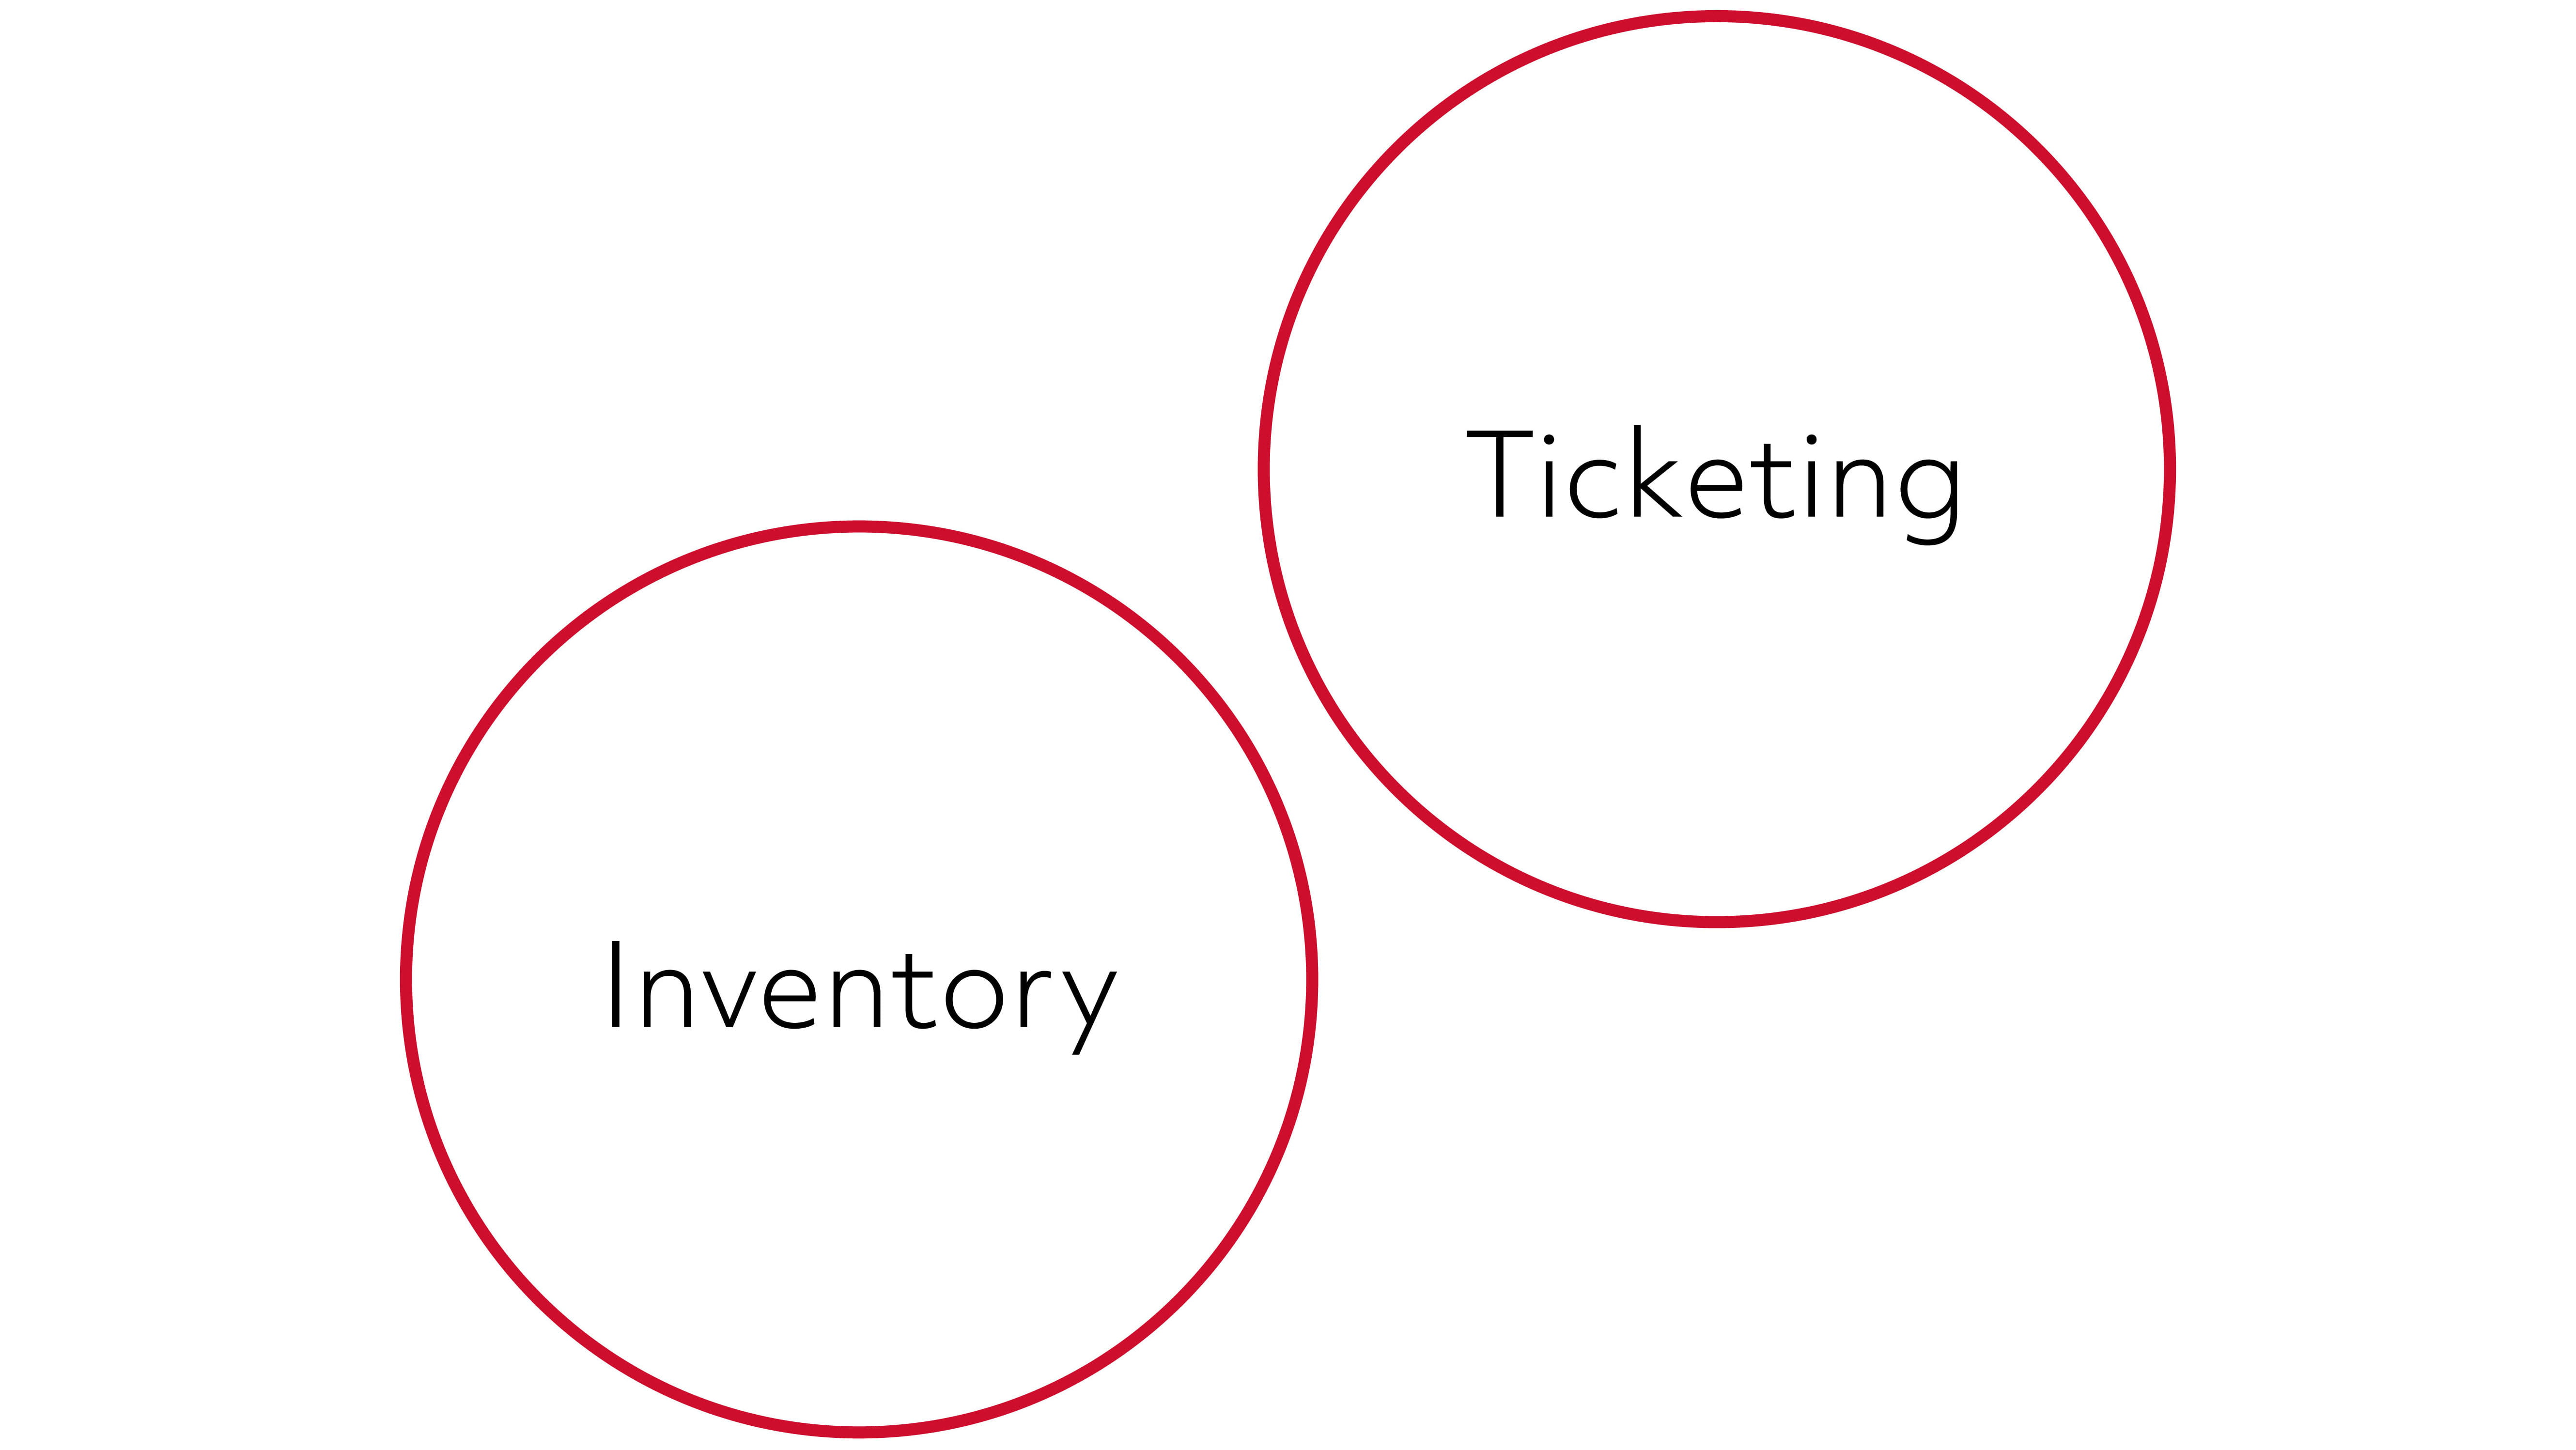 Inventory and ticketing in red circles